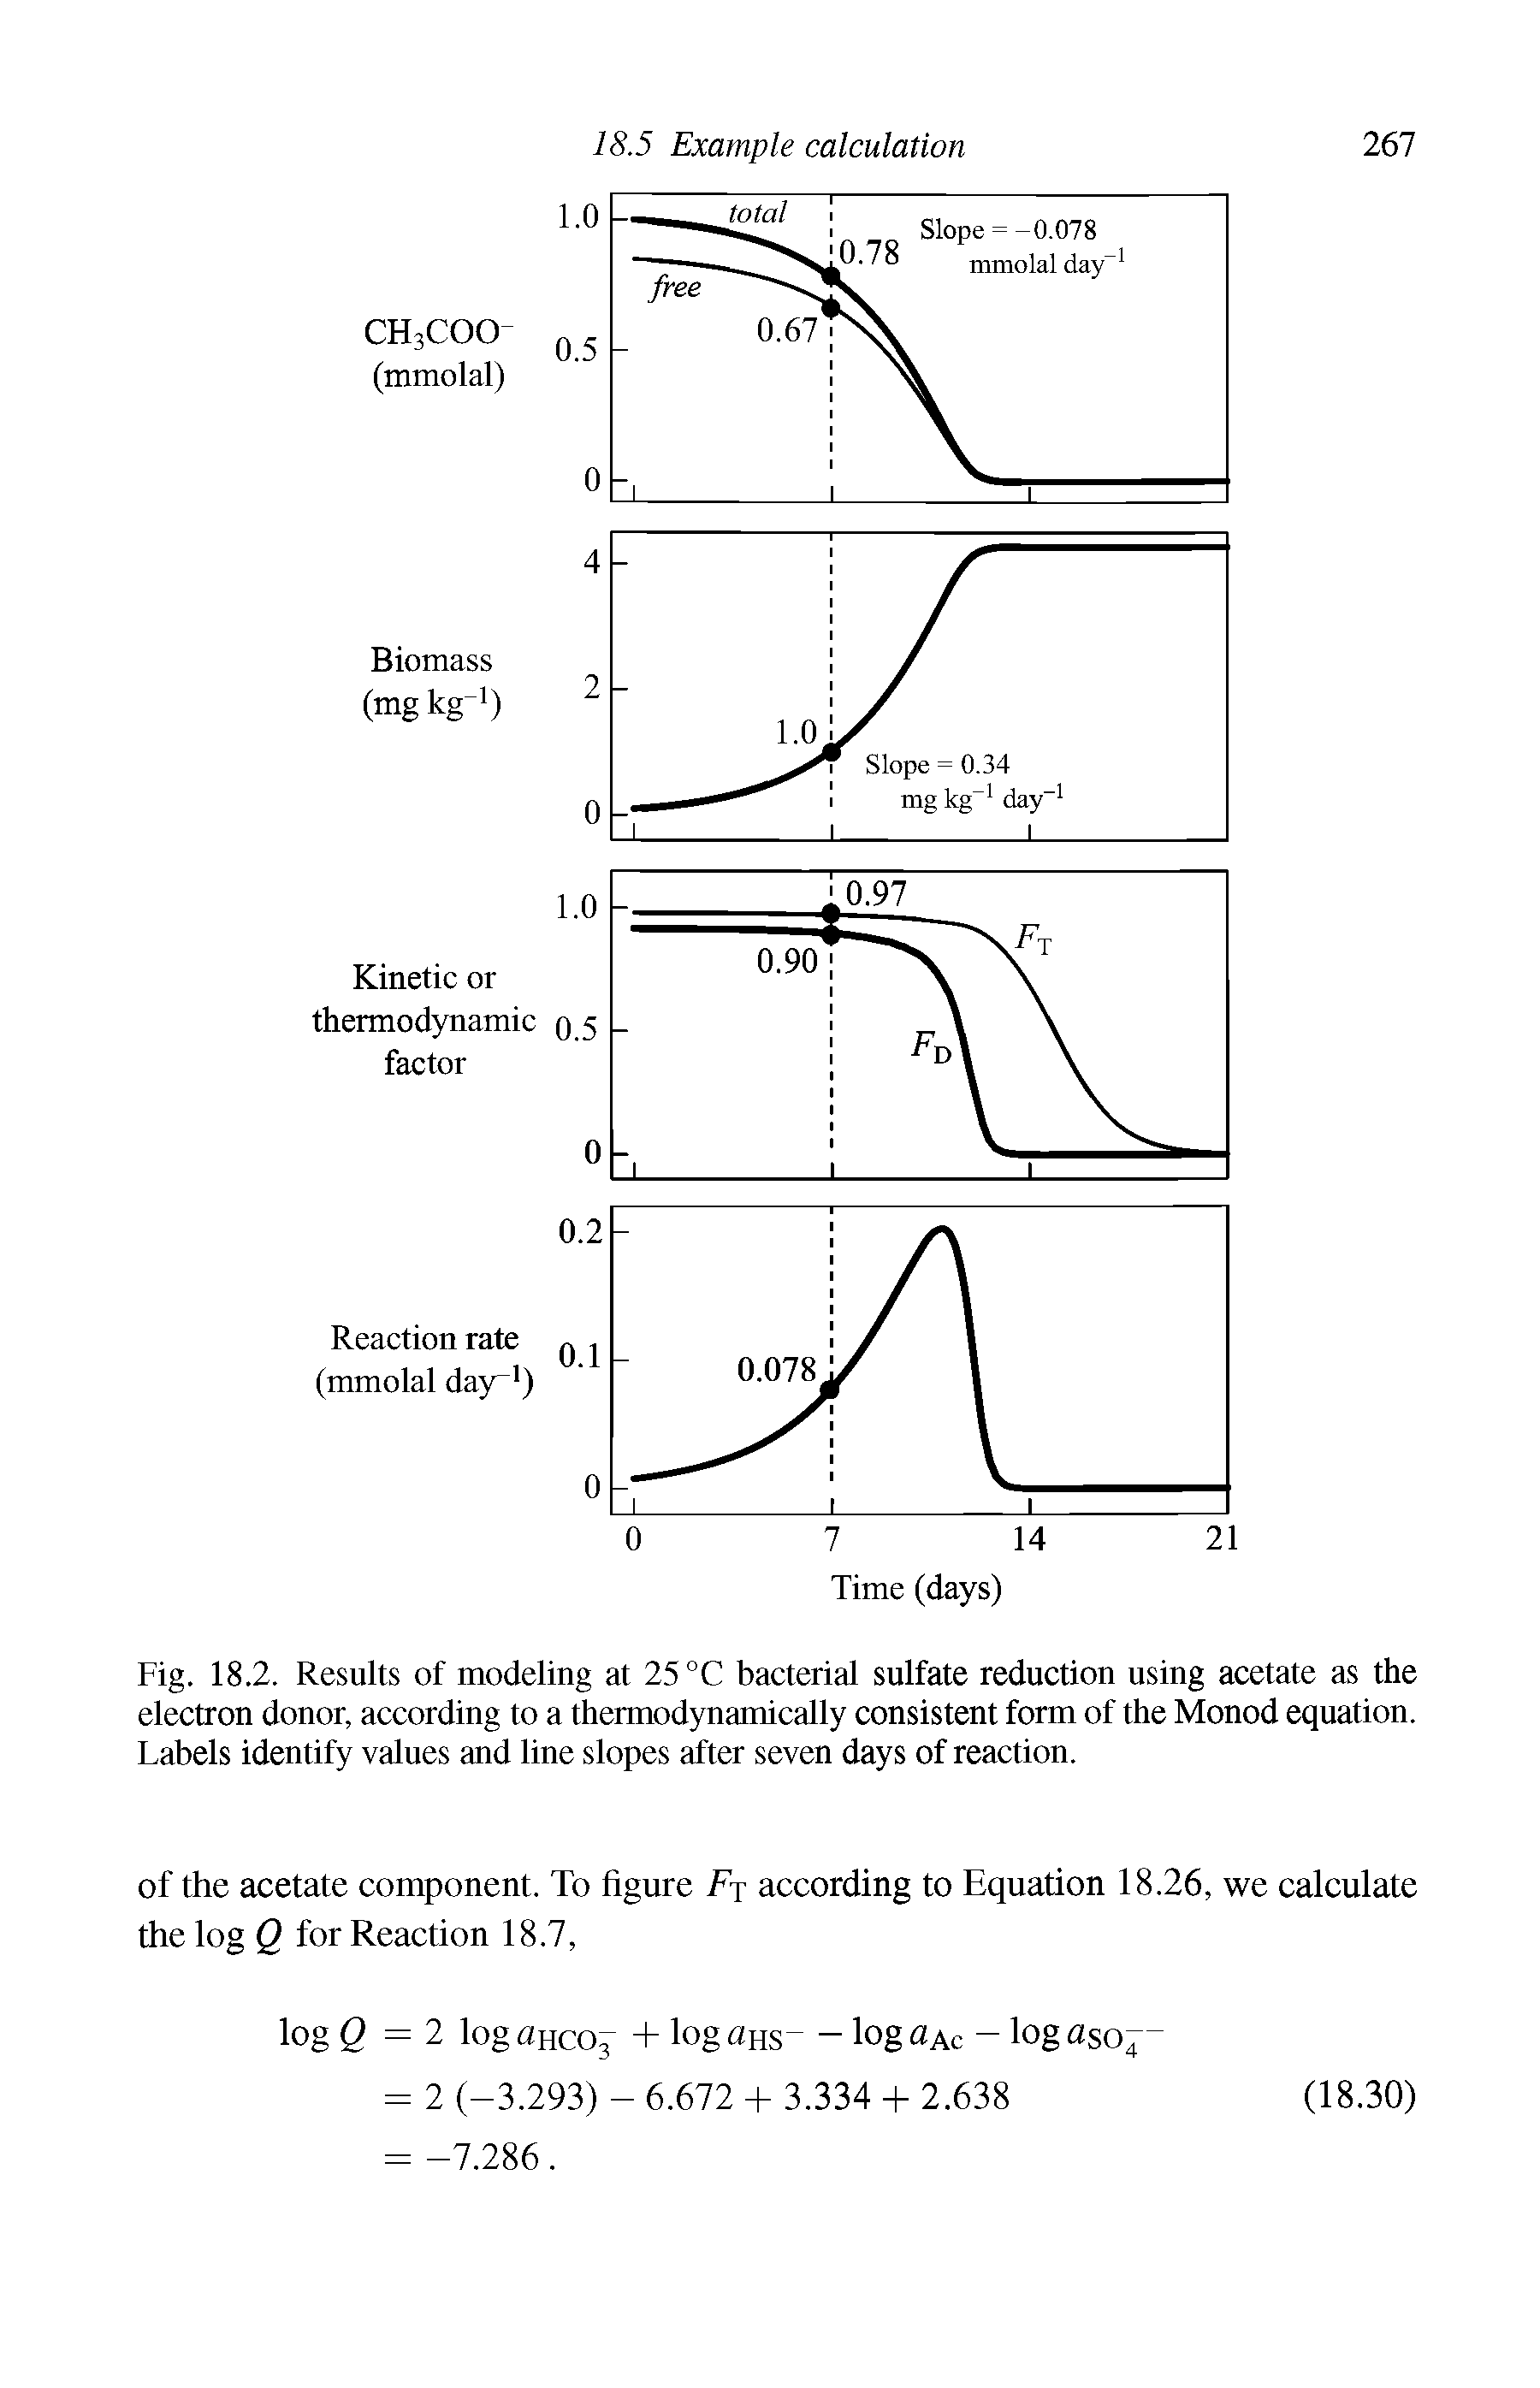 Fig. 18.2. Results of modeling at 25 °C bacterial sulfate reduction using acetate as the electron donor, according to a thermodynamically consistent form of the Monod equation. Labels identify values and line slopes after seven days of reaction.